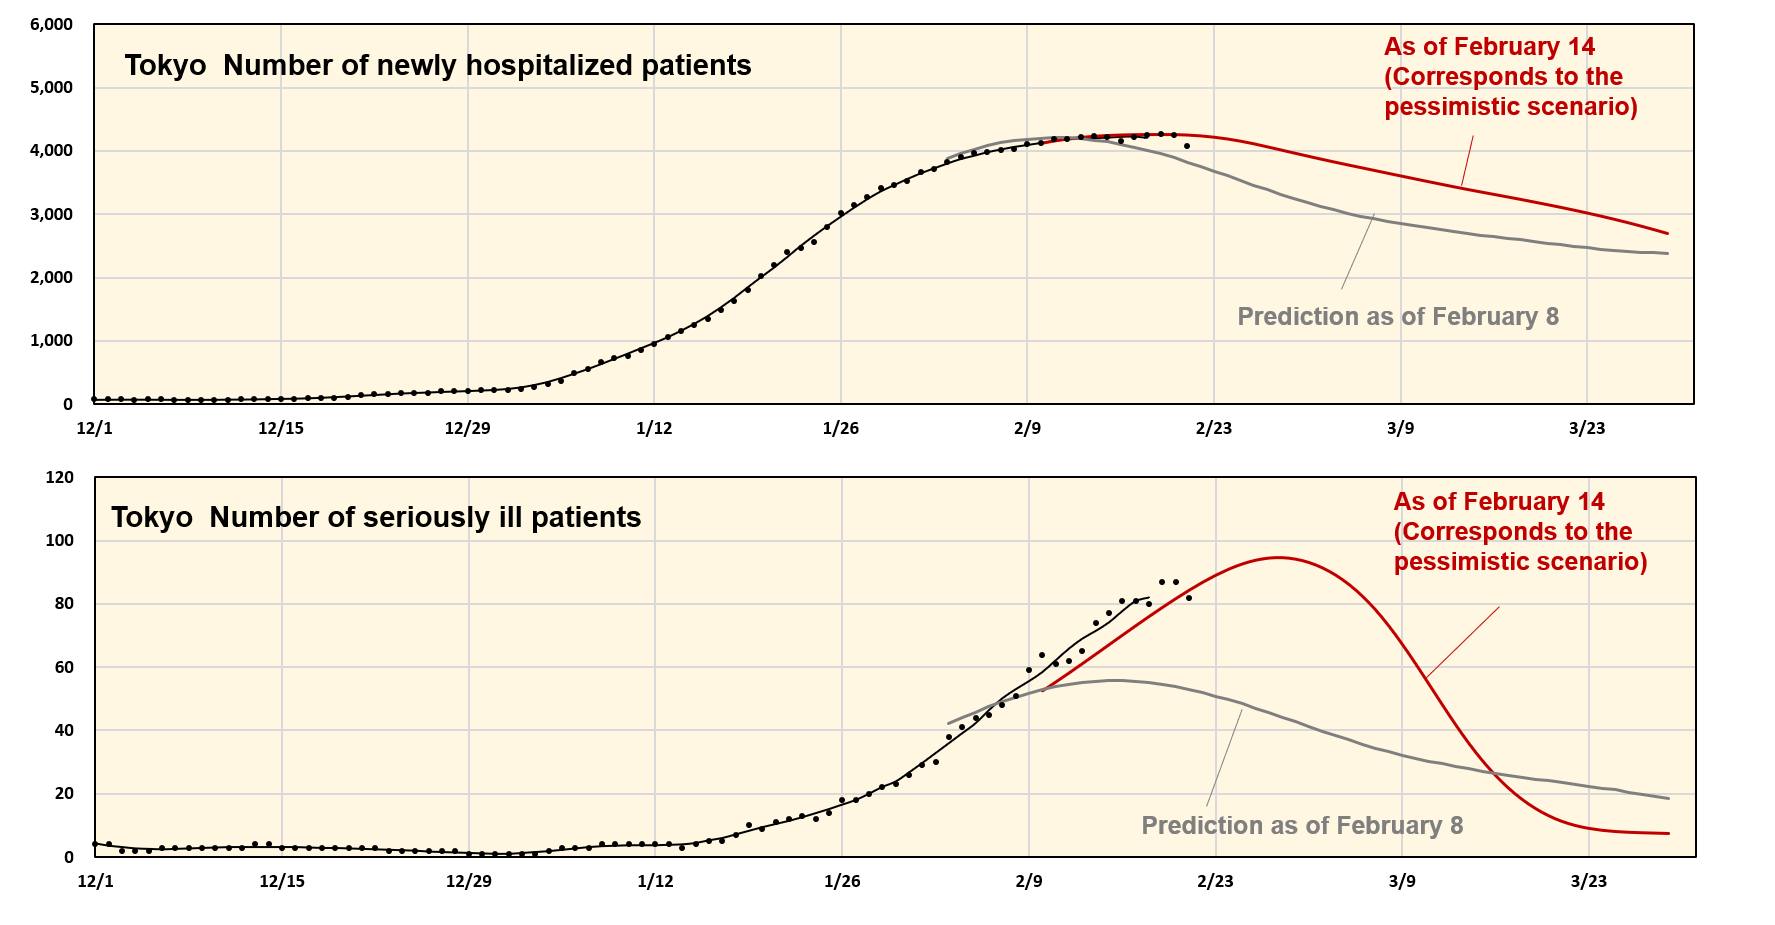 Tokyo: Number of newly hospitalized patients, number of seriously ill patients